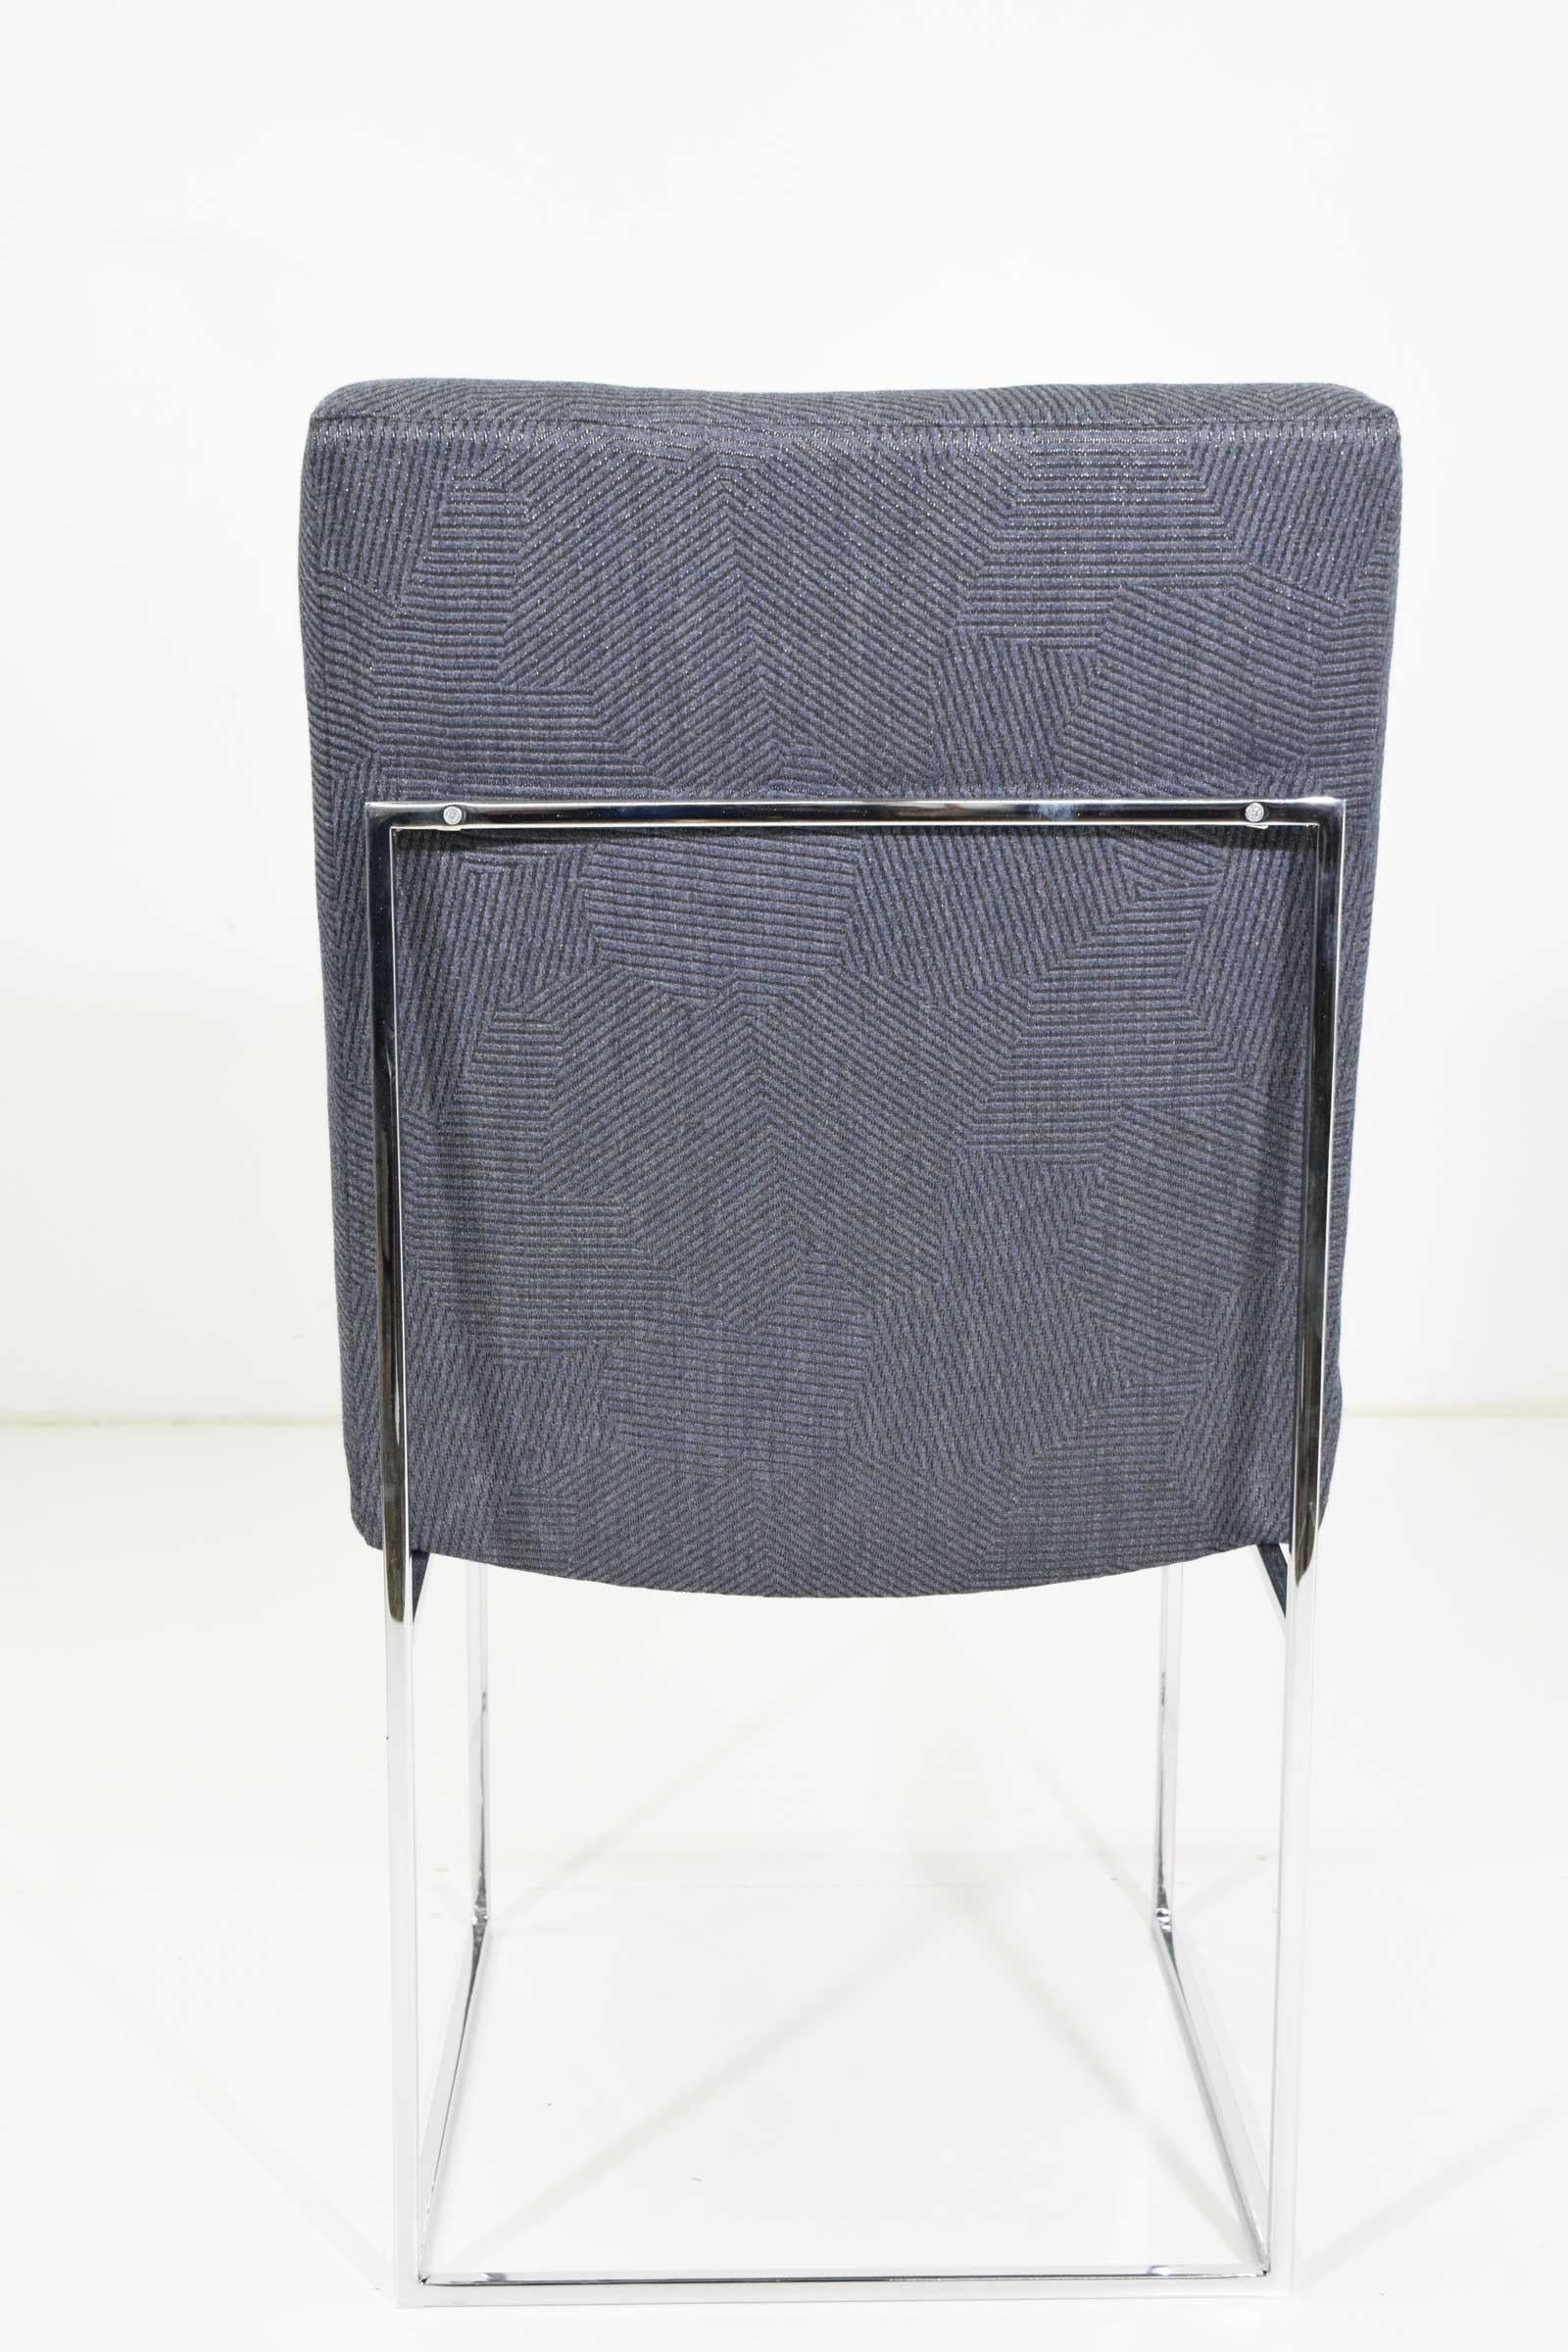 North American Milo Baughman Chrome Dining Chair in Holly Hunt Blue Alpaca, by Pairs up to 8 For Sale